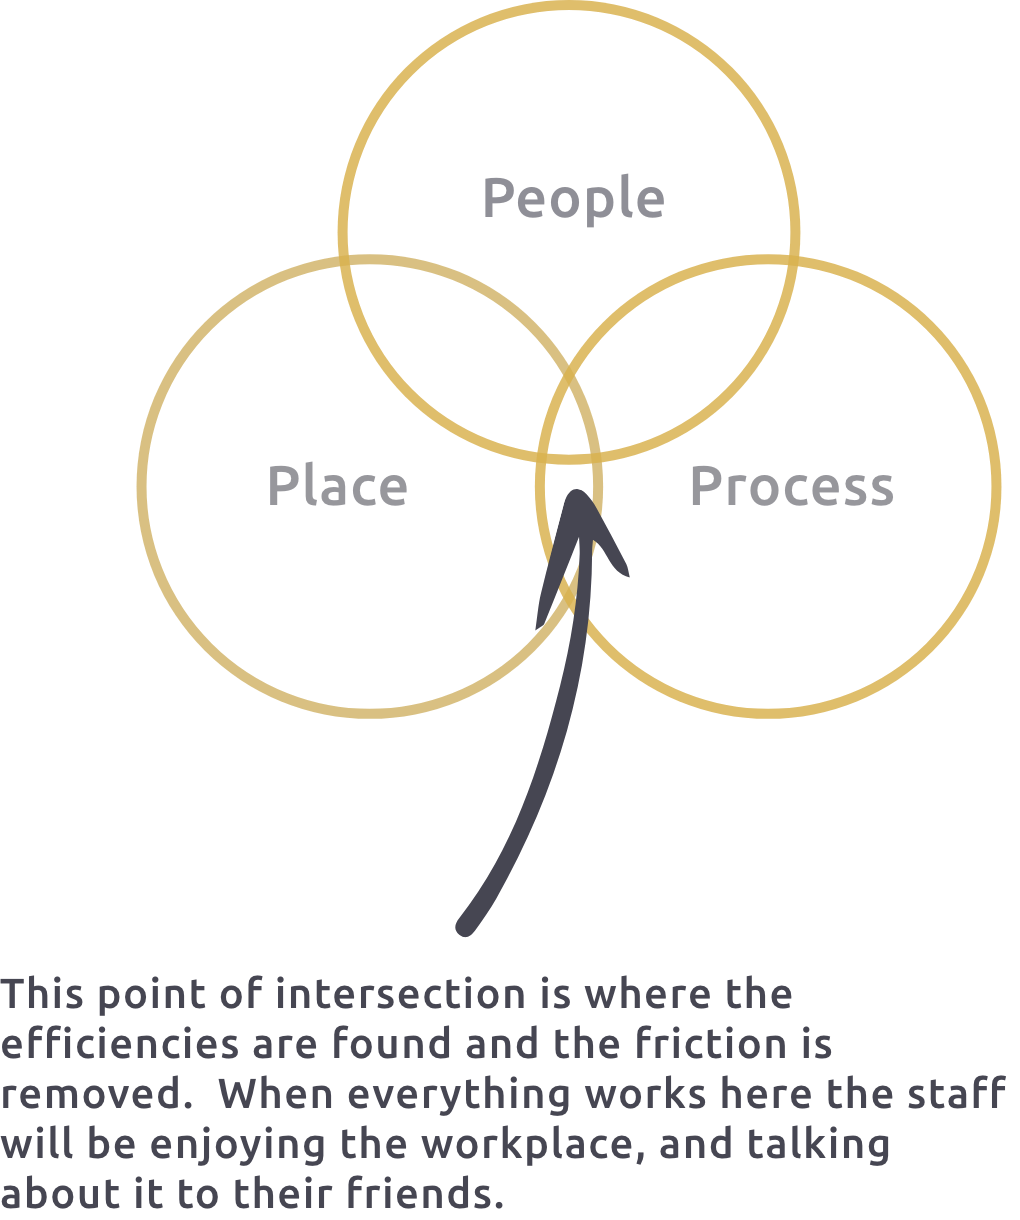 Venn diagram with People, Place and Process overlapping and an arrow pointing to where they all overlap. The text "This point of intersection is where the efficiencies are found and the friction is removed. When everything works here the staff will be enjoying the workplace, and talking about it to their friends." is at the end of the arrow.